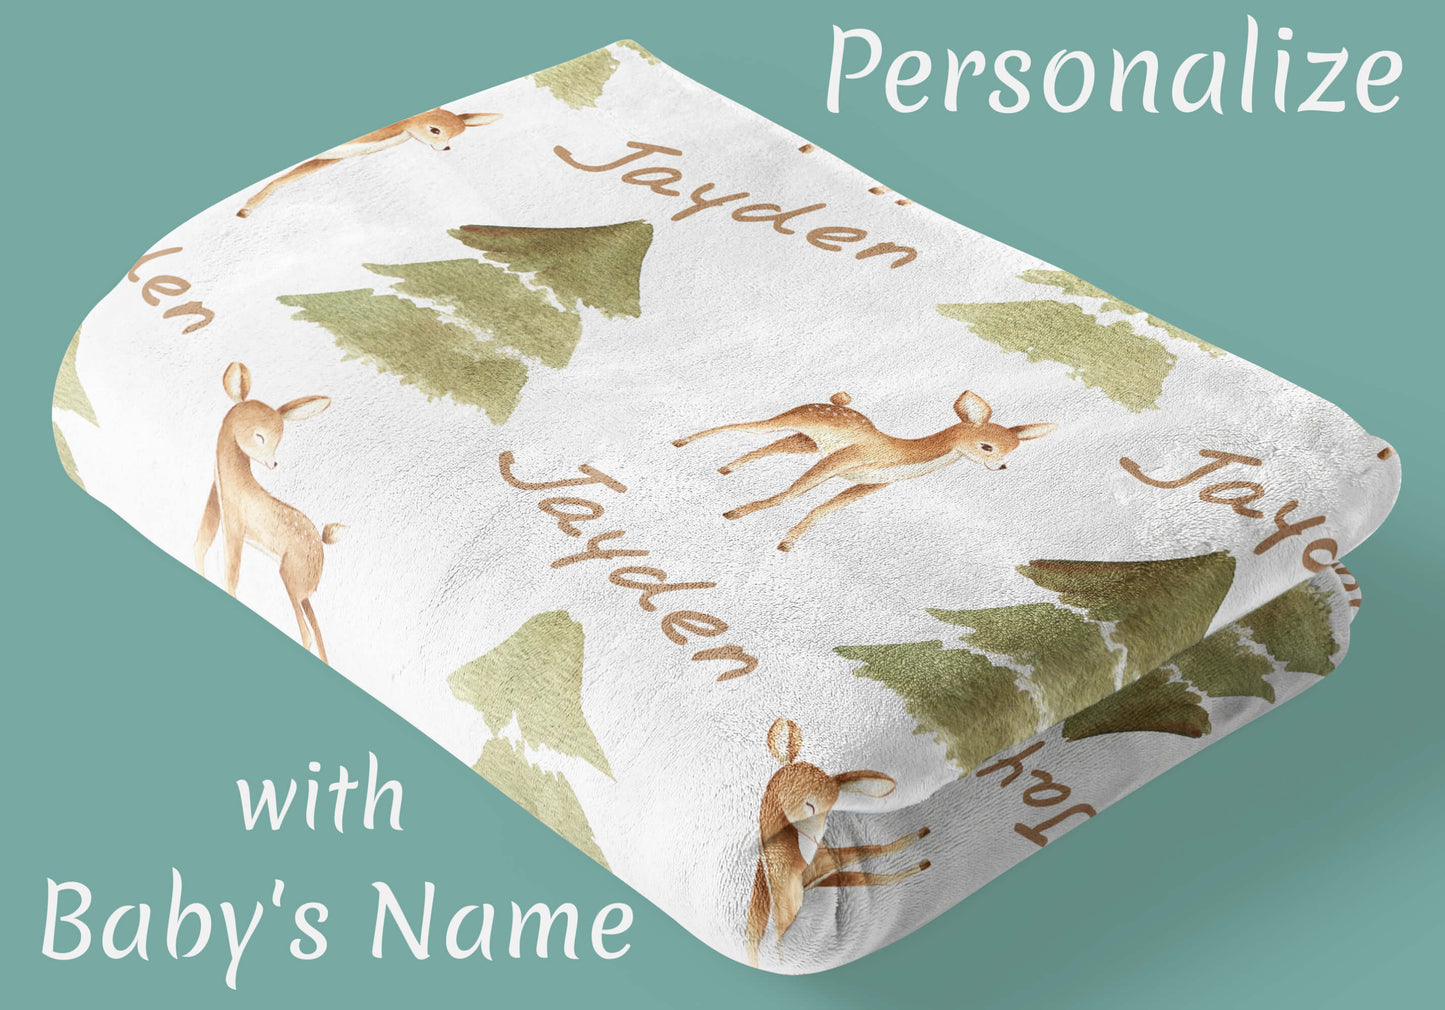 Custom Baby Blanket with Name, Deers and Trees